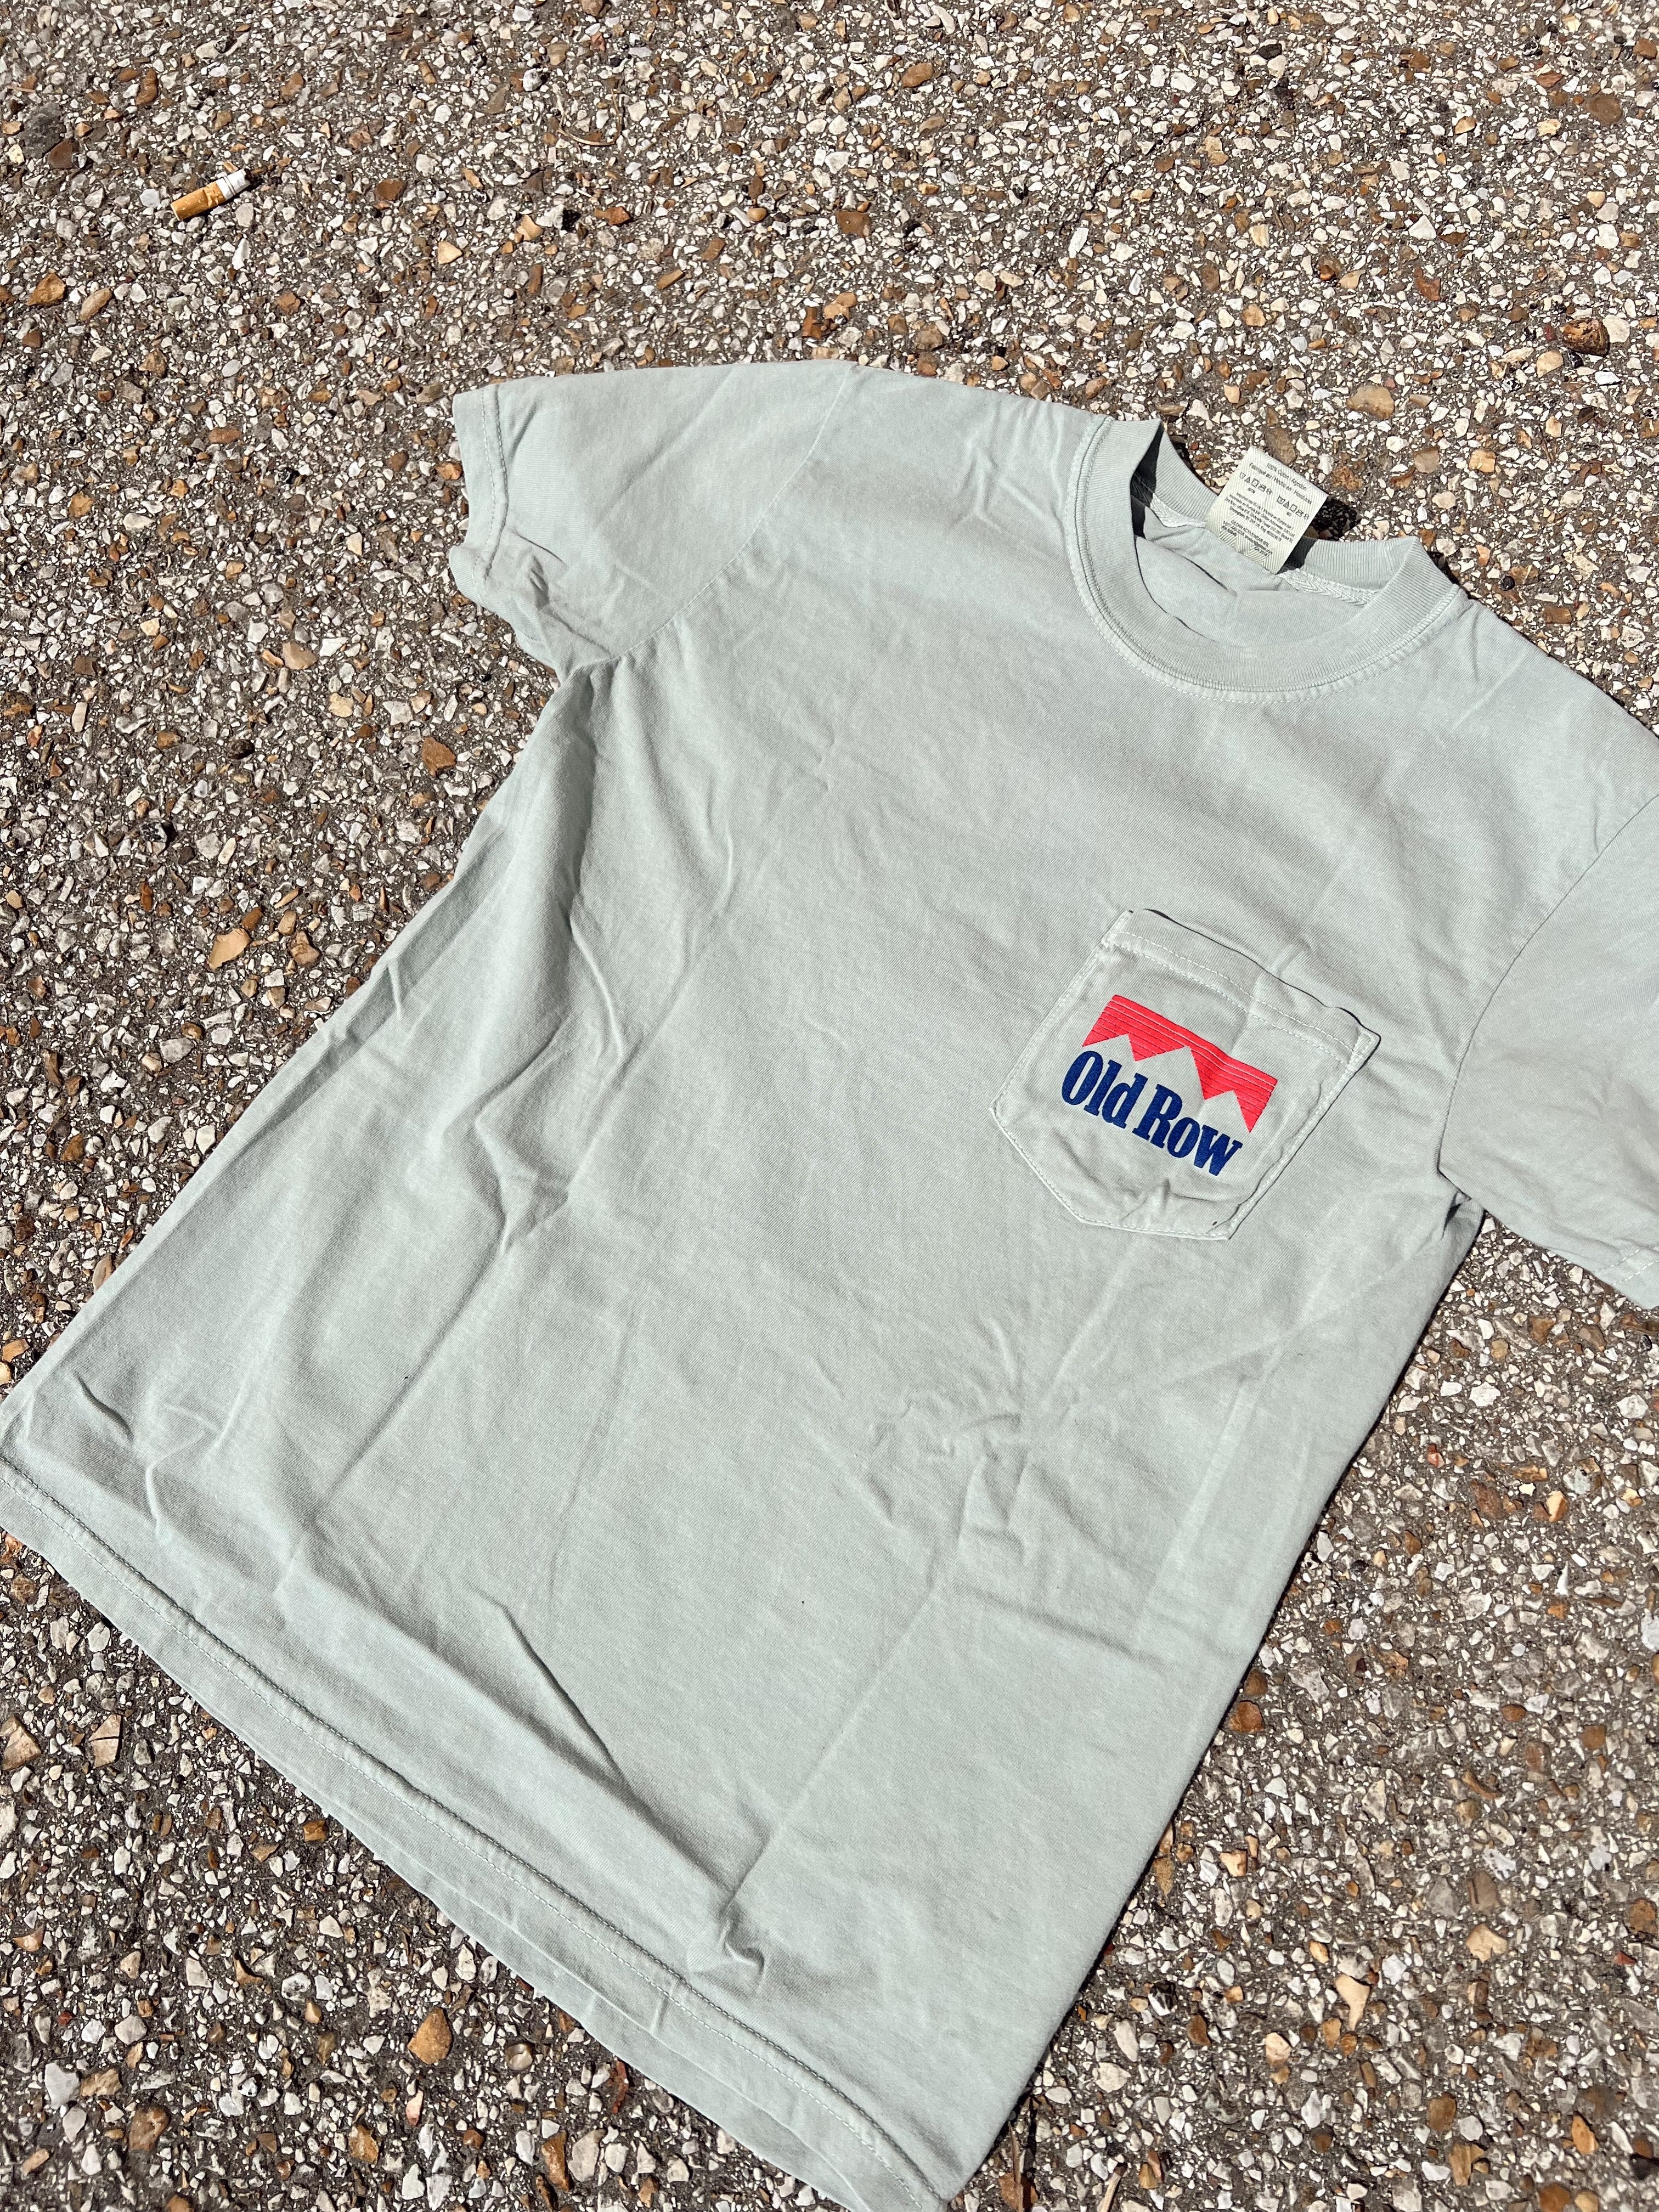 The Cowboy 5.0 Pocket Tee by Old Row